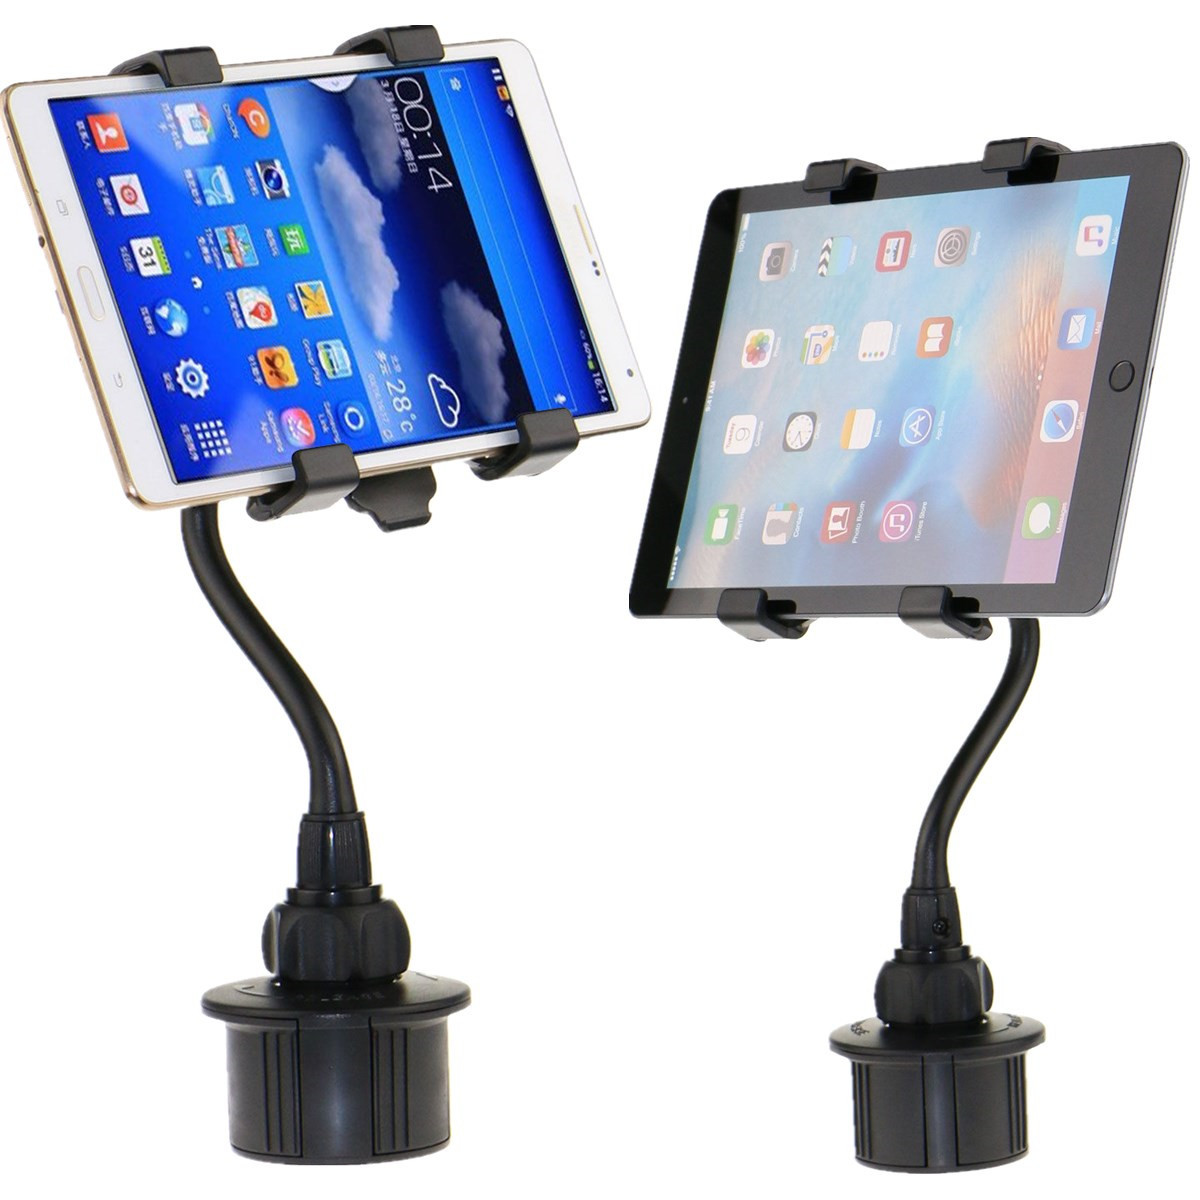 Find Adjustable Bendy Car Cup Holder Mount for 7 Inch to 10 Inch Tablet for Sale on Gipsybee.com with cryptocurrencies